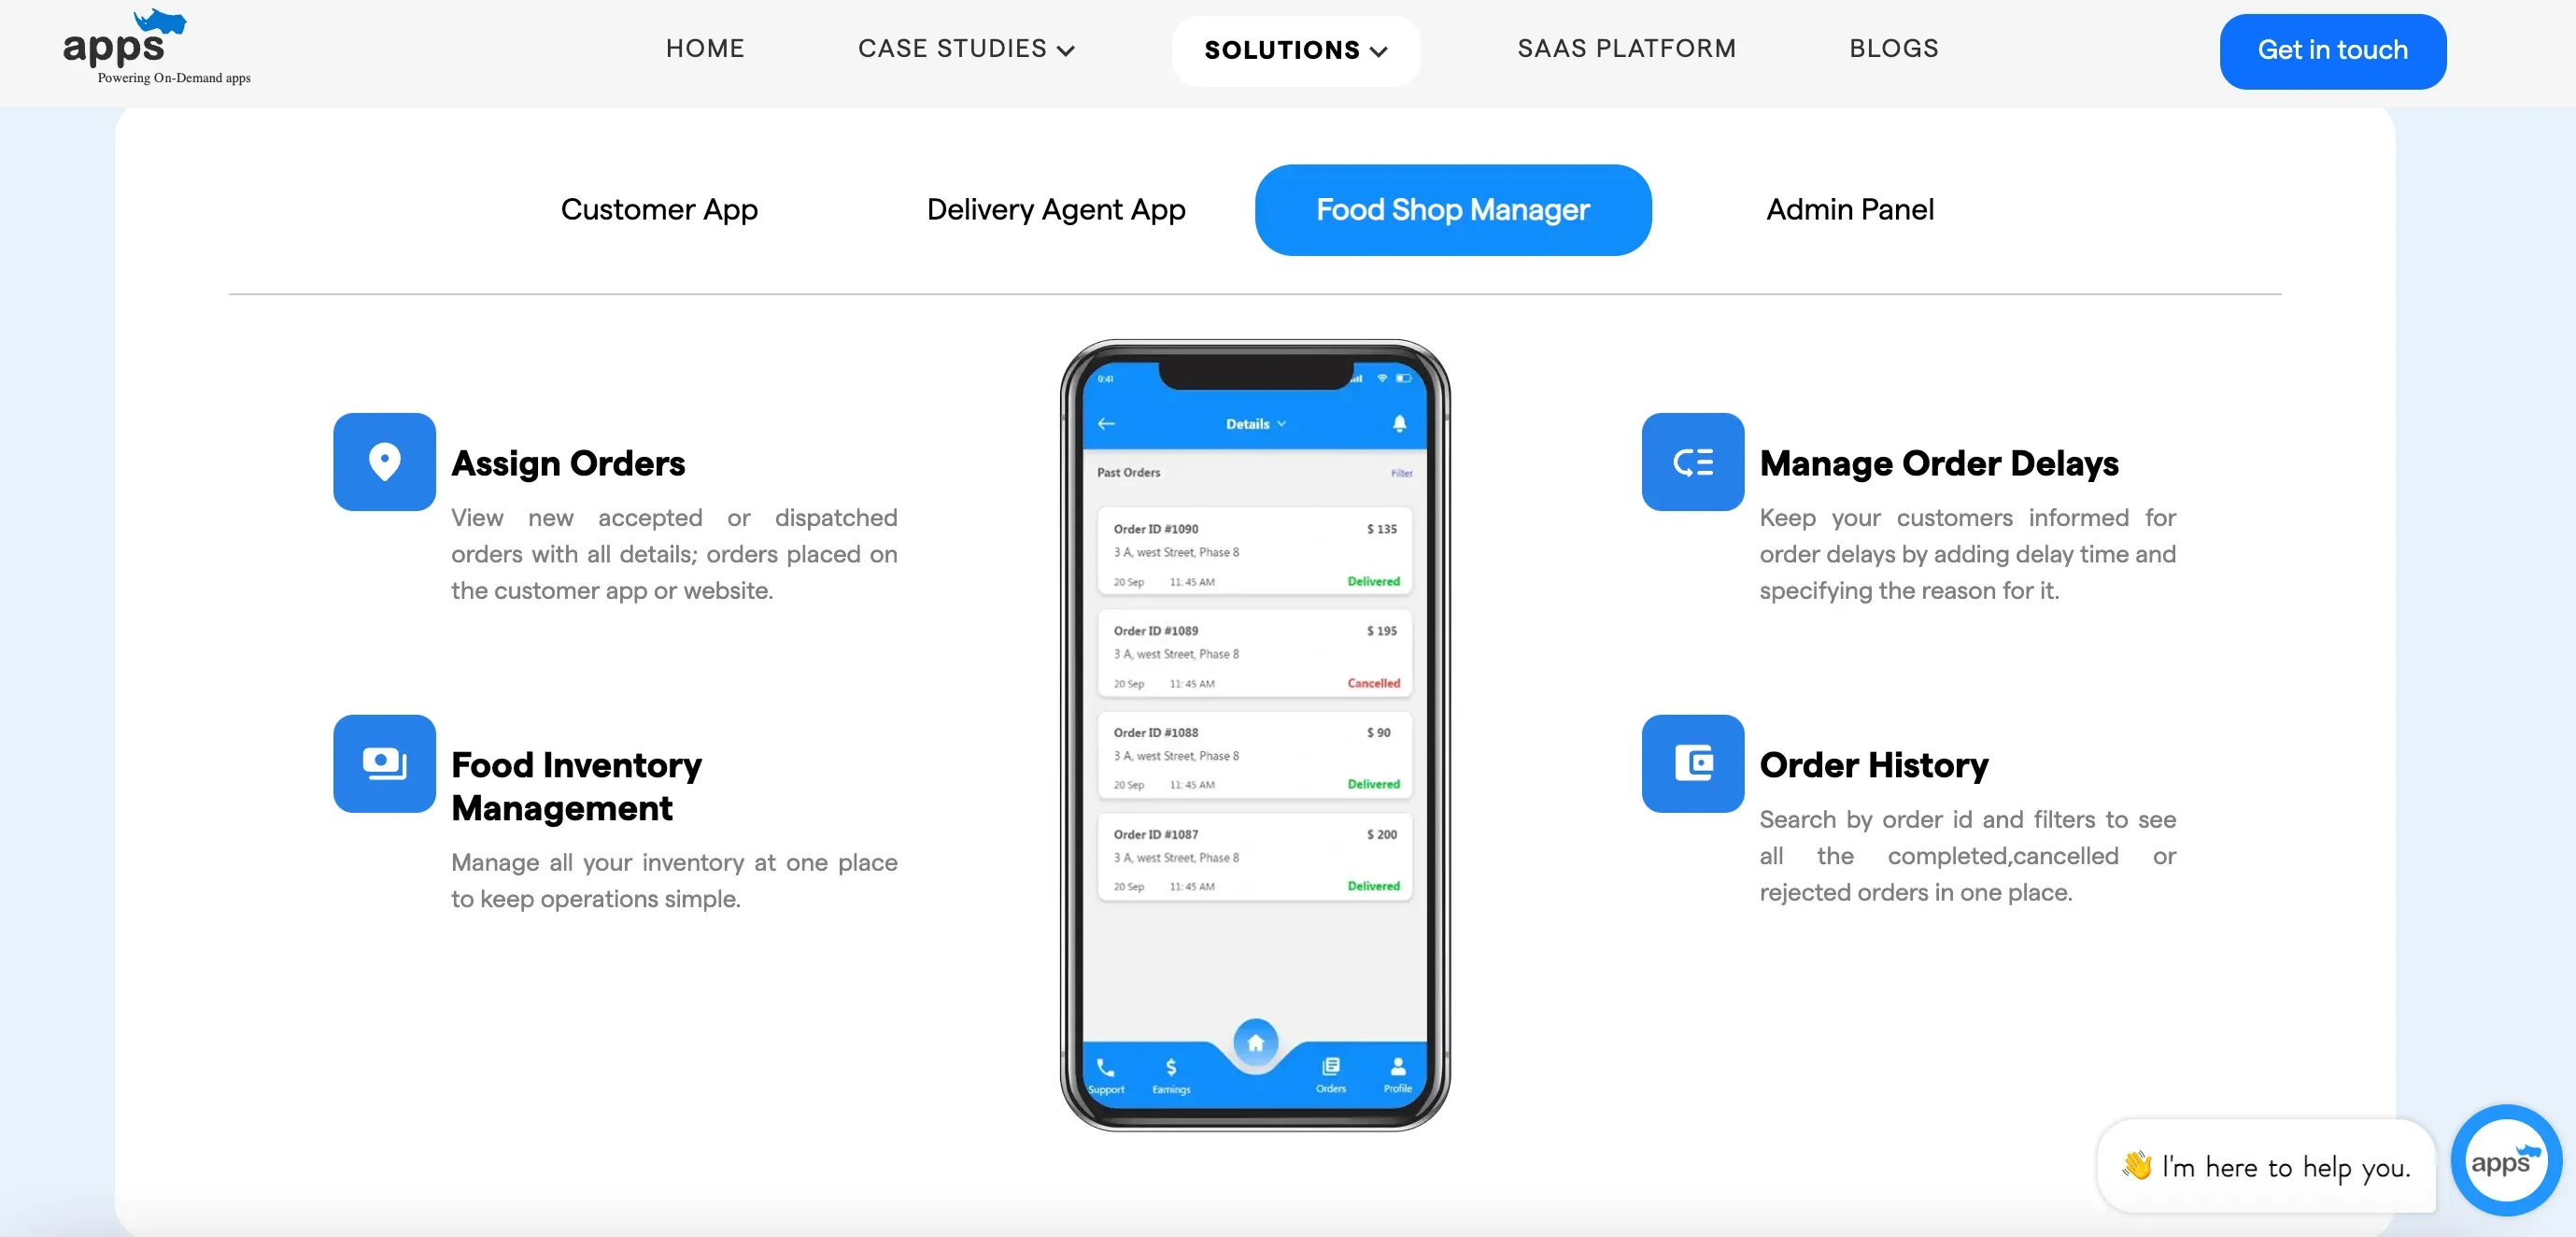 AppsRhino's Food Devlivery App Solution